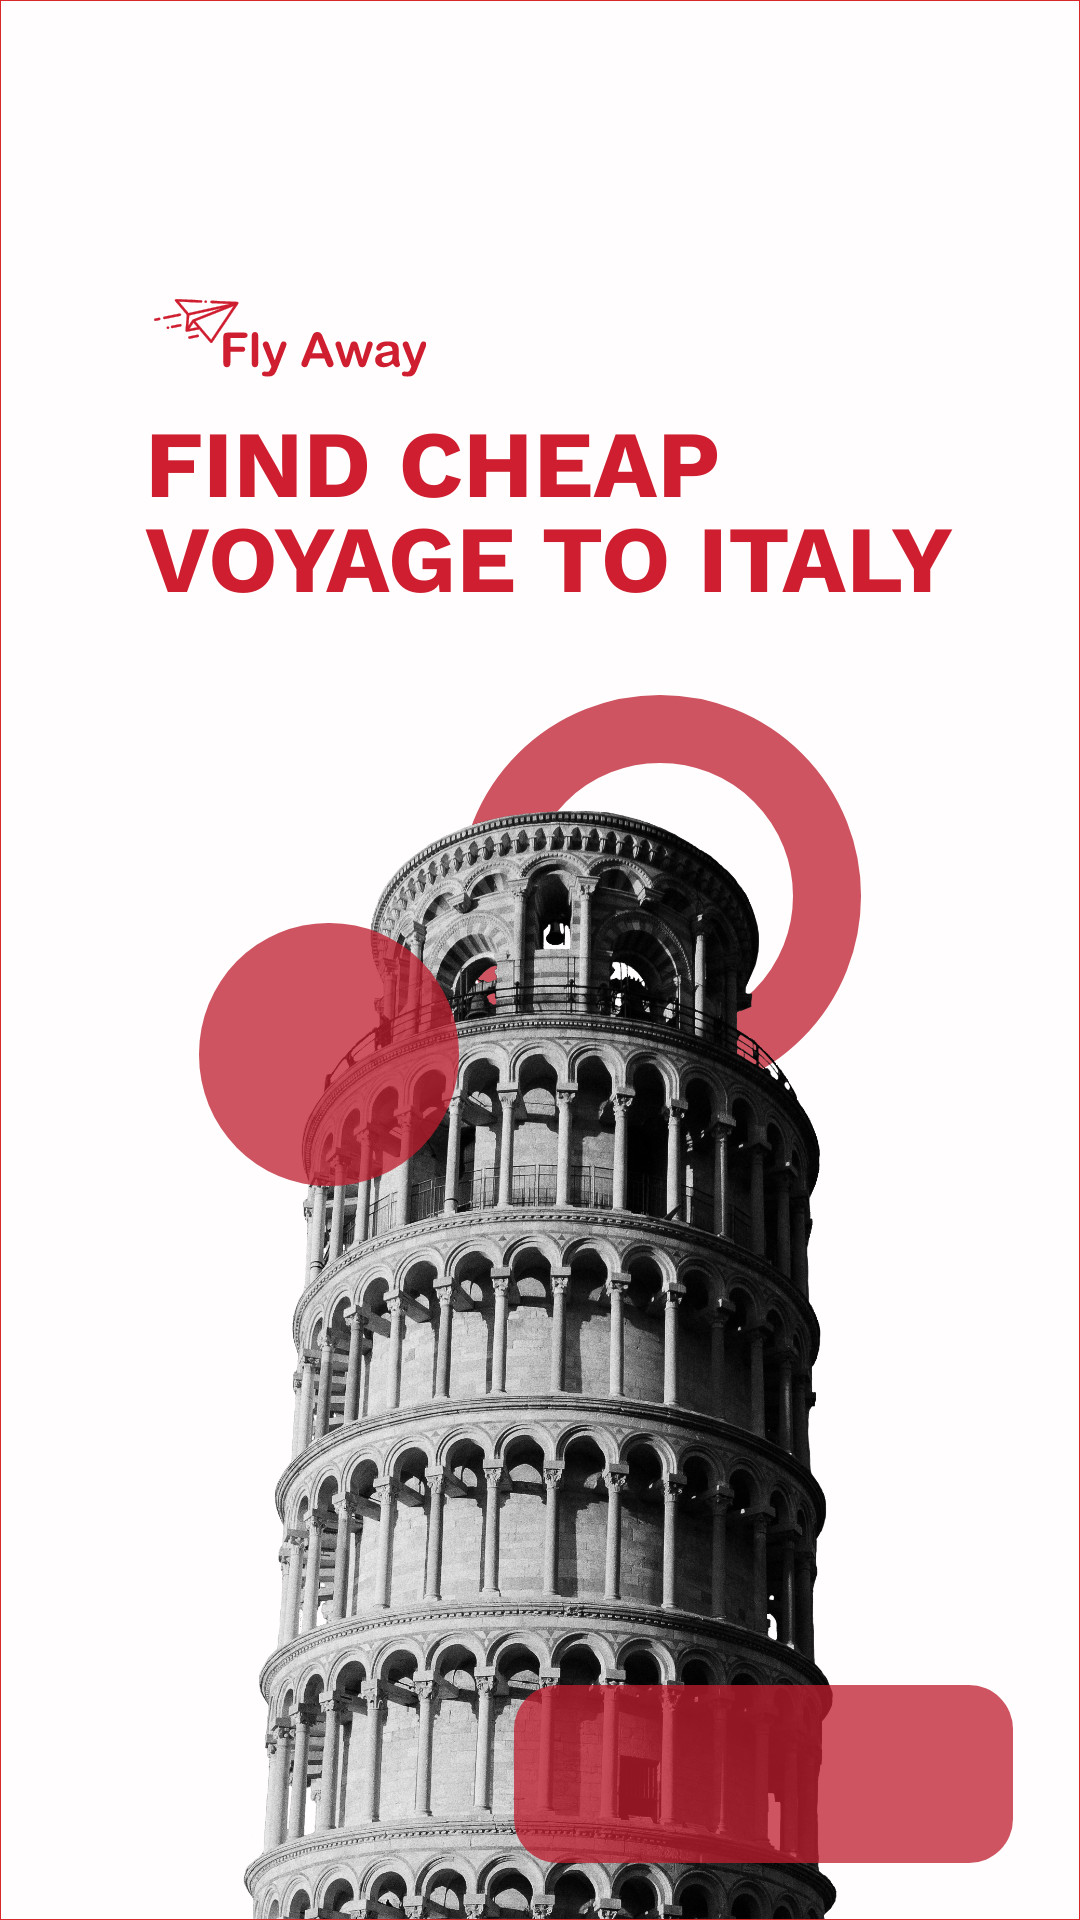 Find Cheap Voyage to Italy Inline Rectangle 300x250